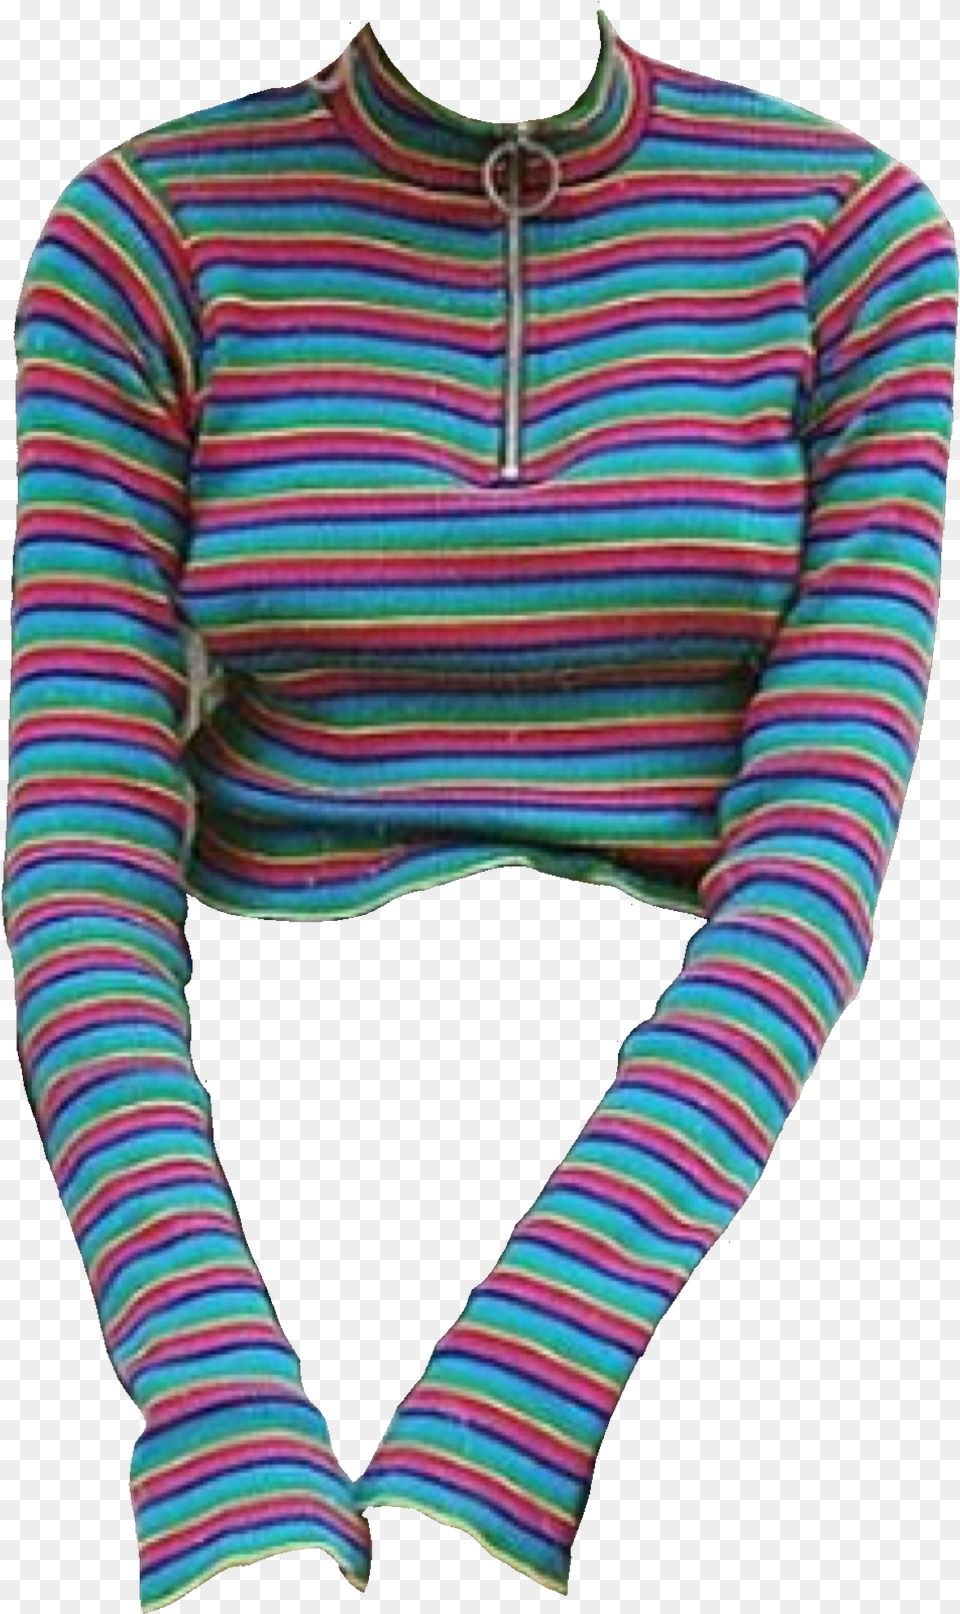 Striped Long Sleeve Shirt, Clothing, Knitwear, Long Sleeve, Sweater Free Png